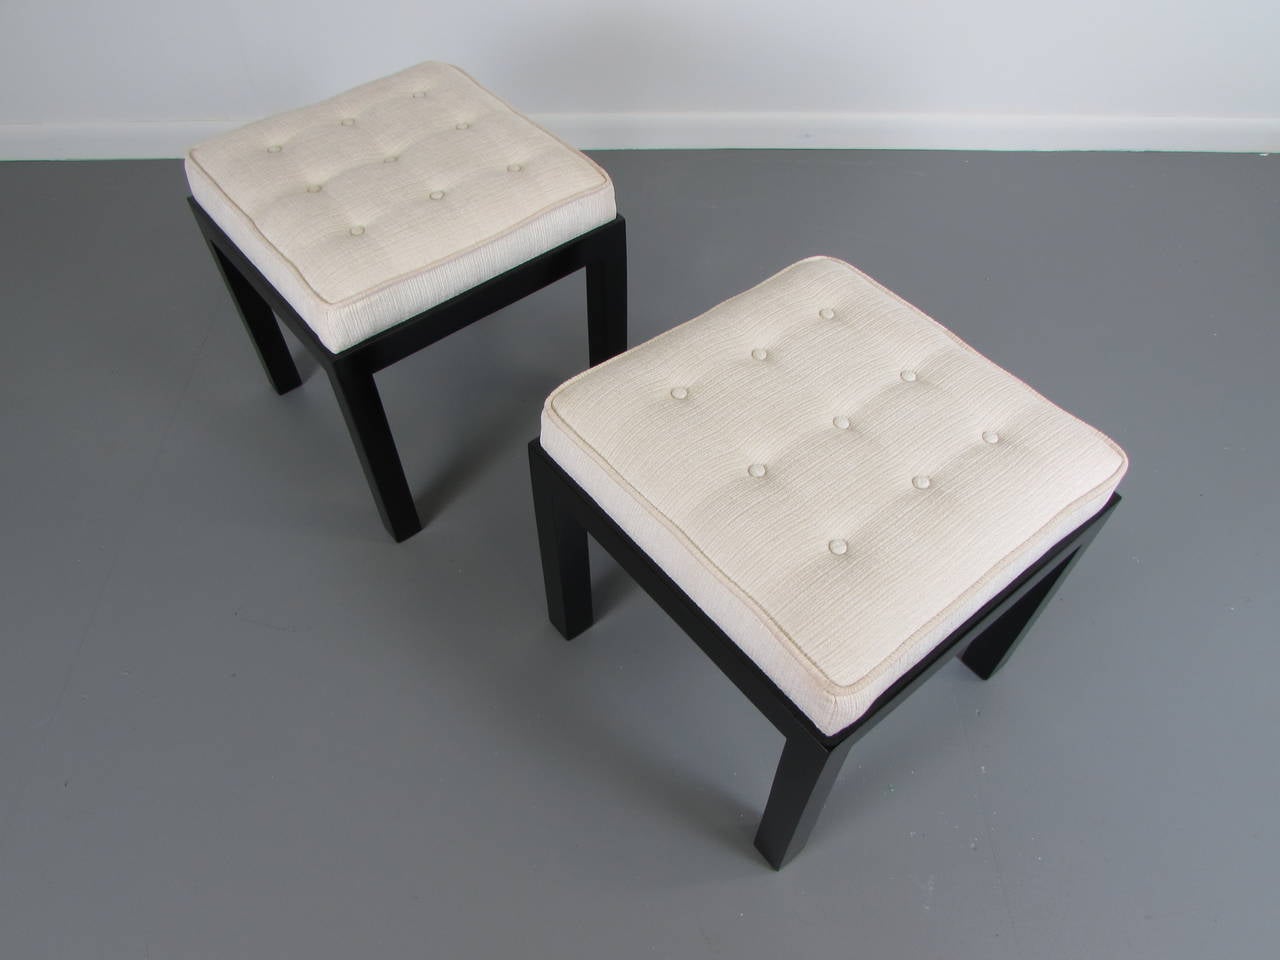 Handsome pair of upholstered stools or benches in the style of Harvey Probber, 1960s. These stools have been refinished and reupholster in a texted cream velvet. Condition is immaculate. 

We offer free regular deliveries to NYC and Philadelphia